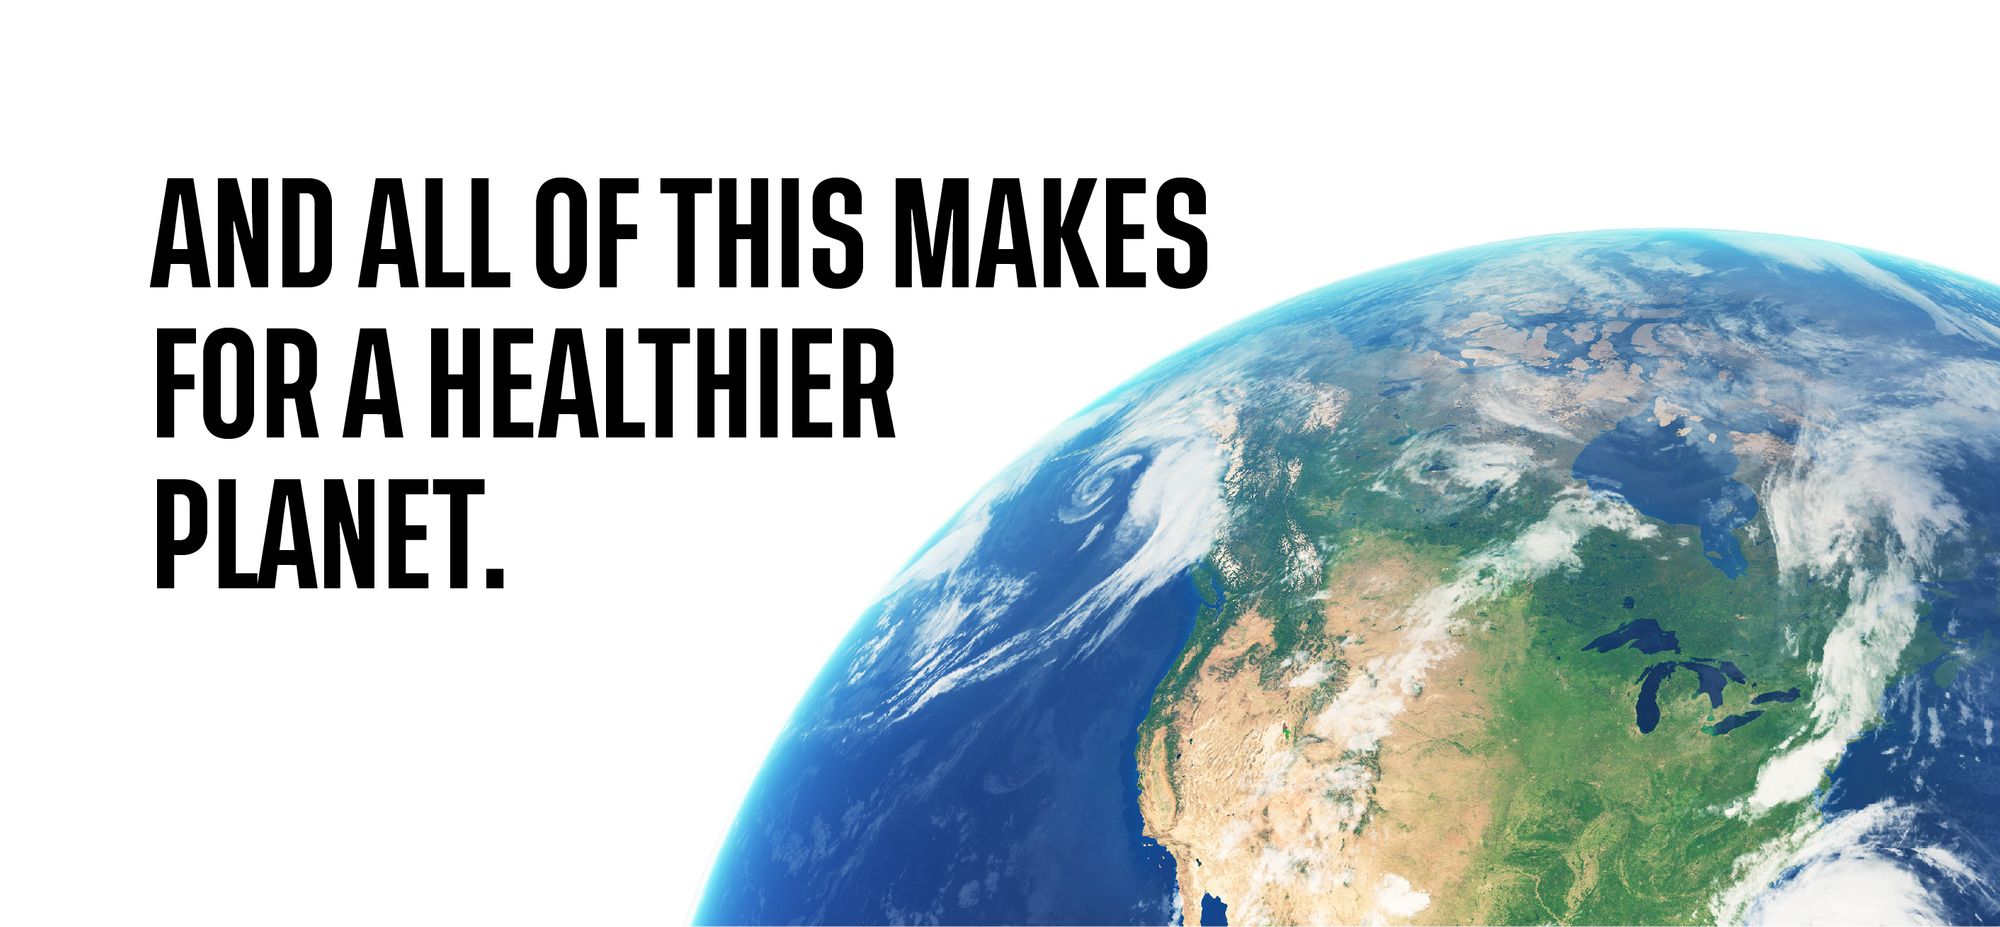 And all of this makes for a healthier planet. 